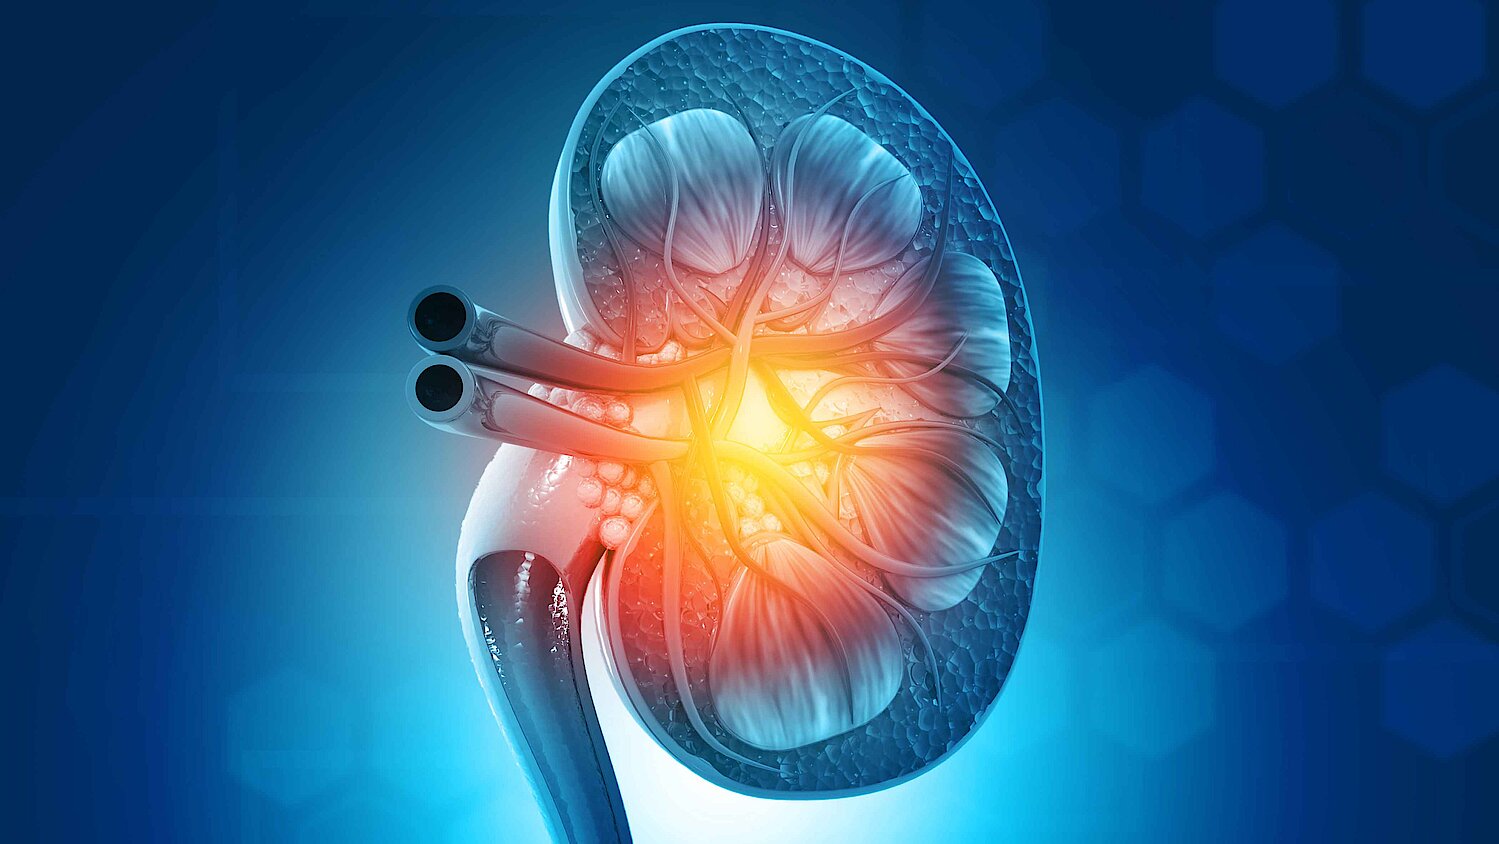 Human kidney cross section on blue, science background.